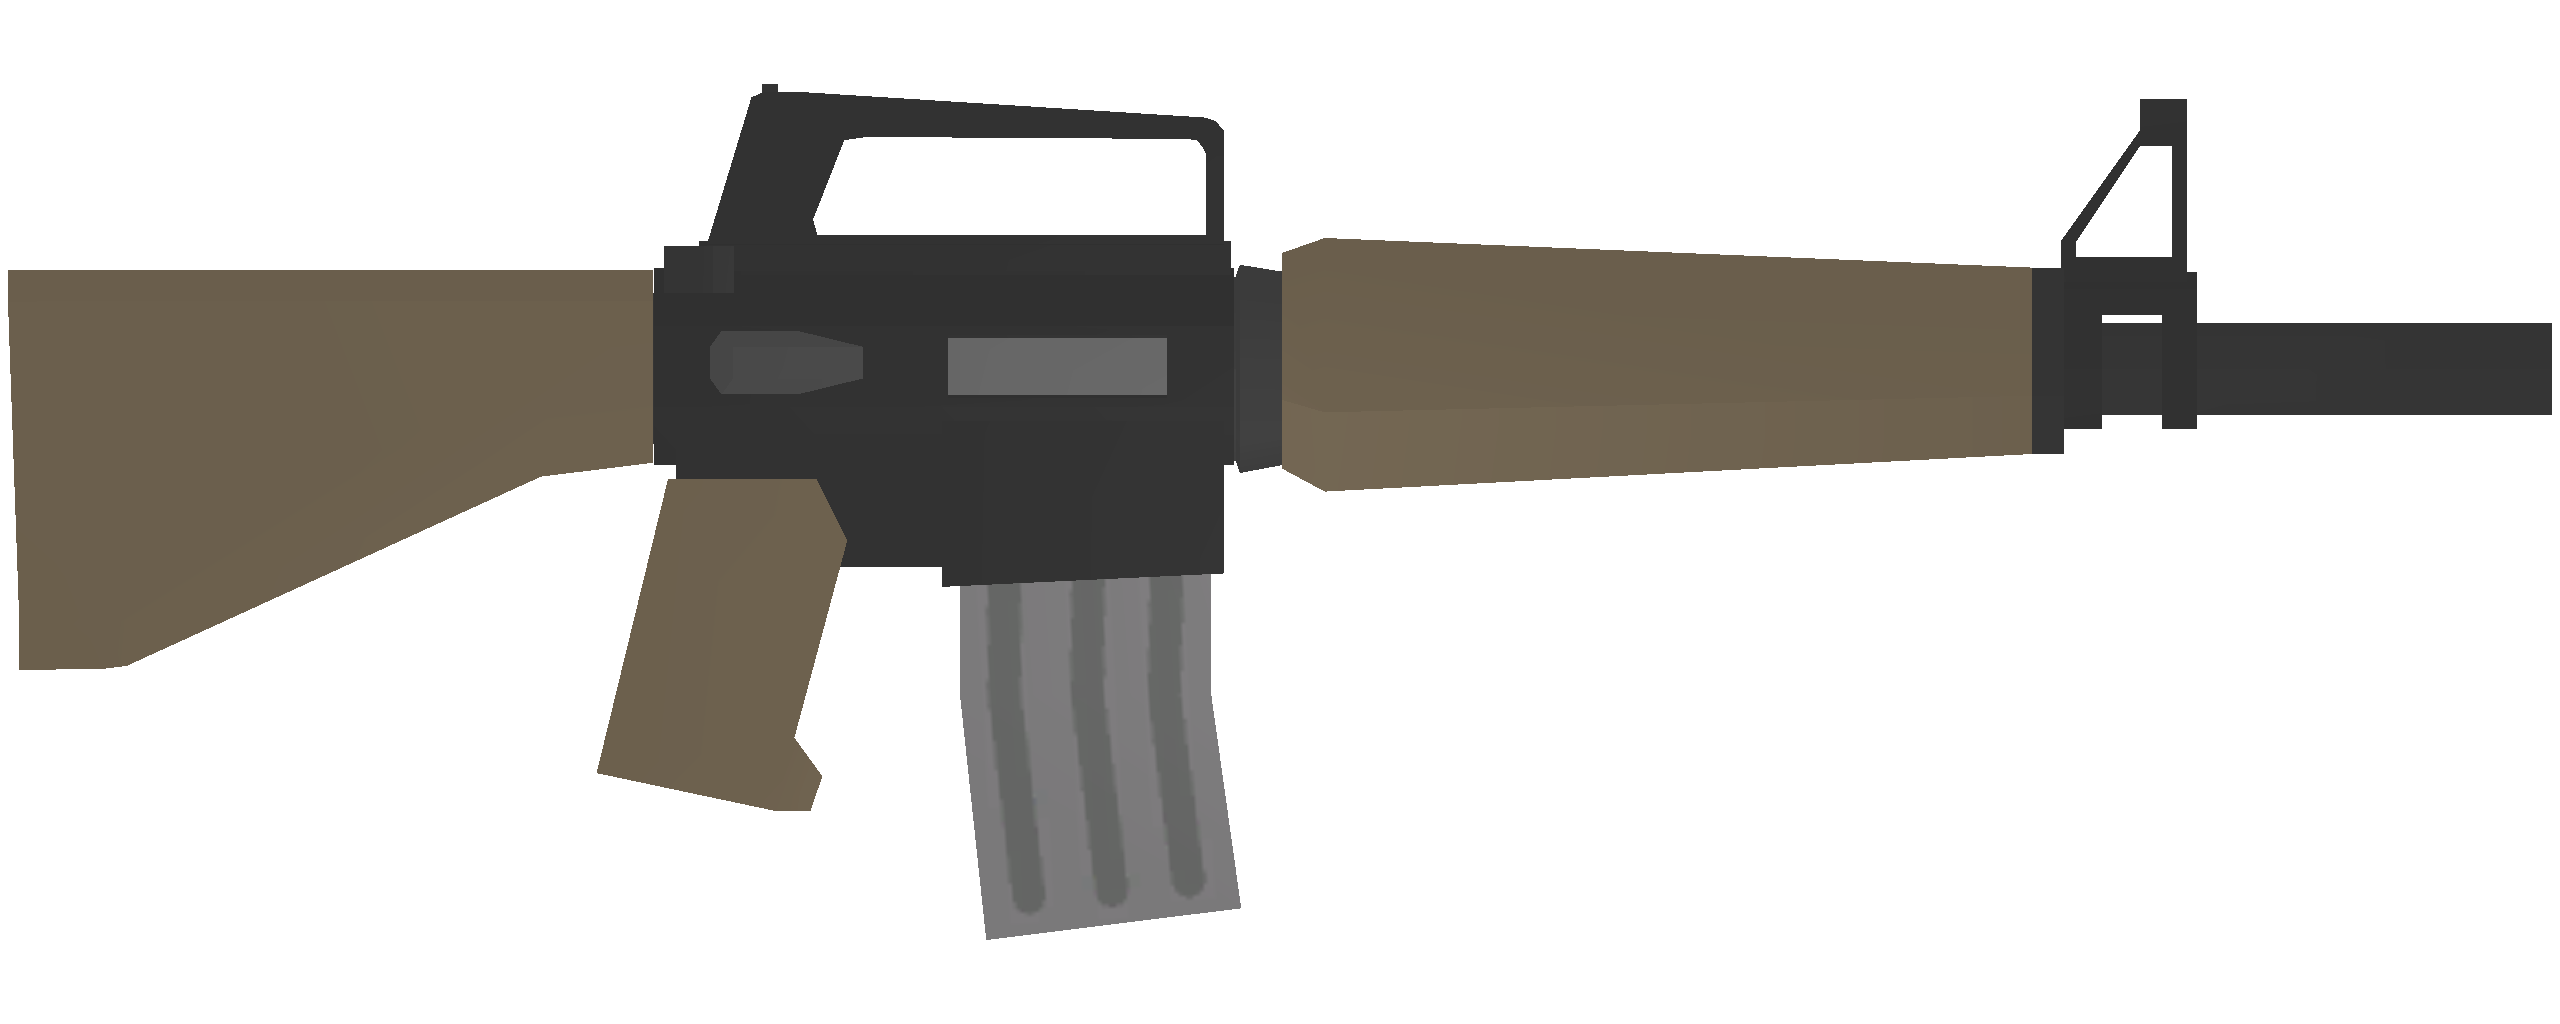 Unturned - Kuwait Items Redux + ID List for Magazines and Attachments - Assault Rifles - F086D86